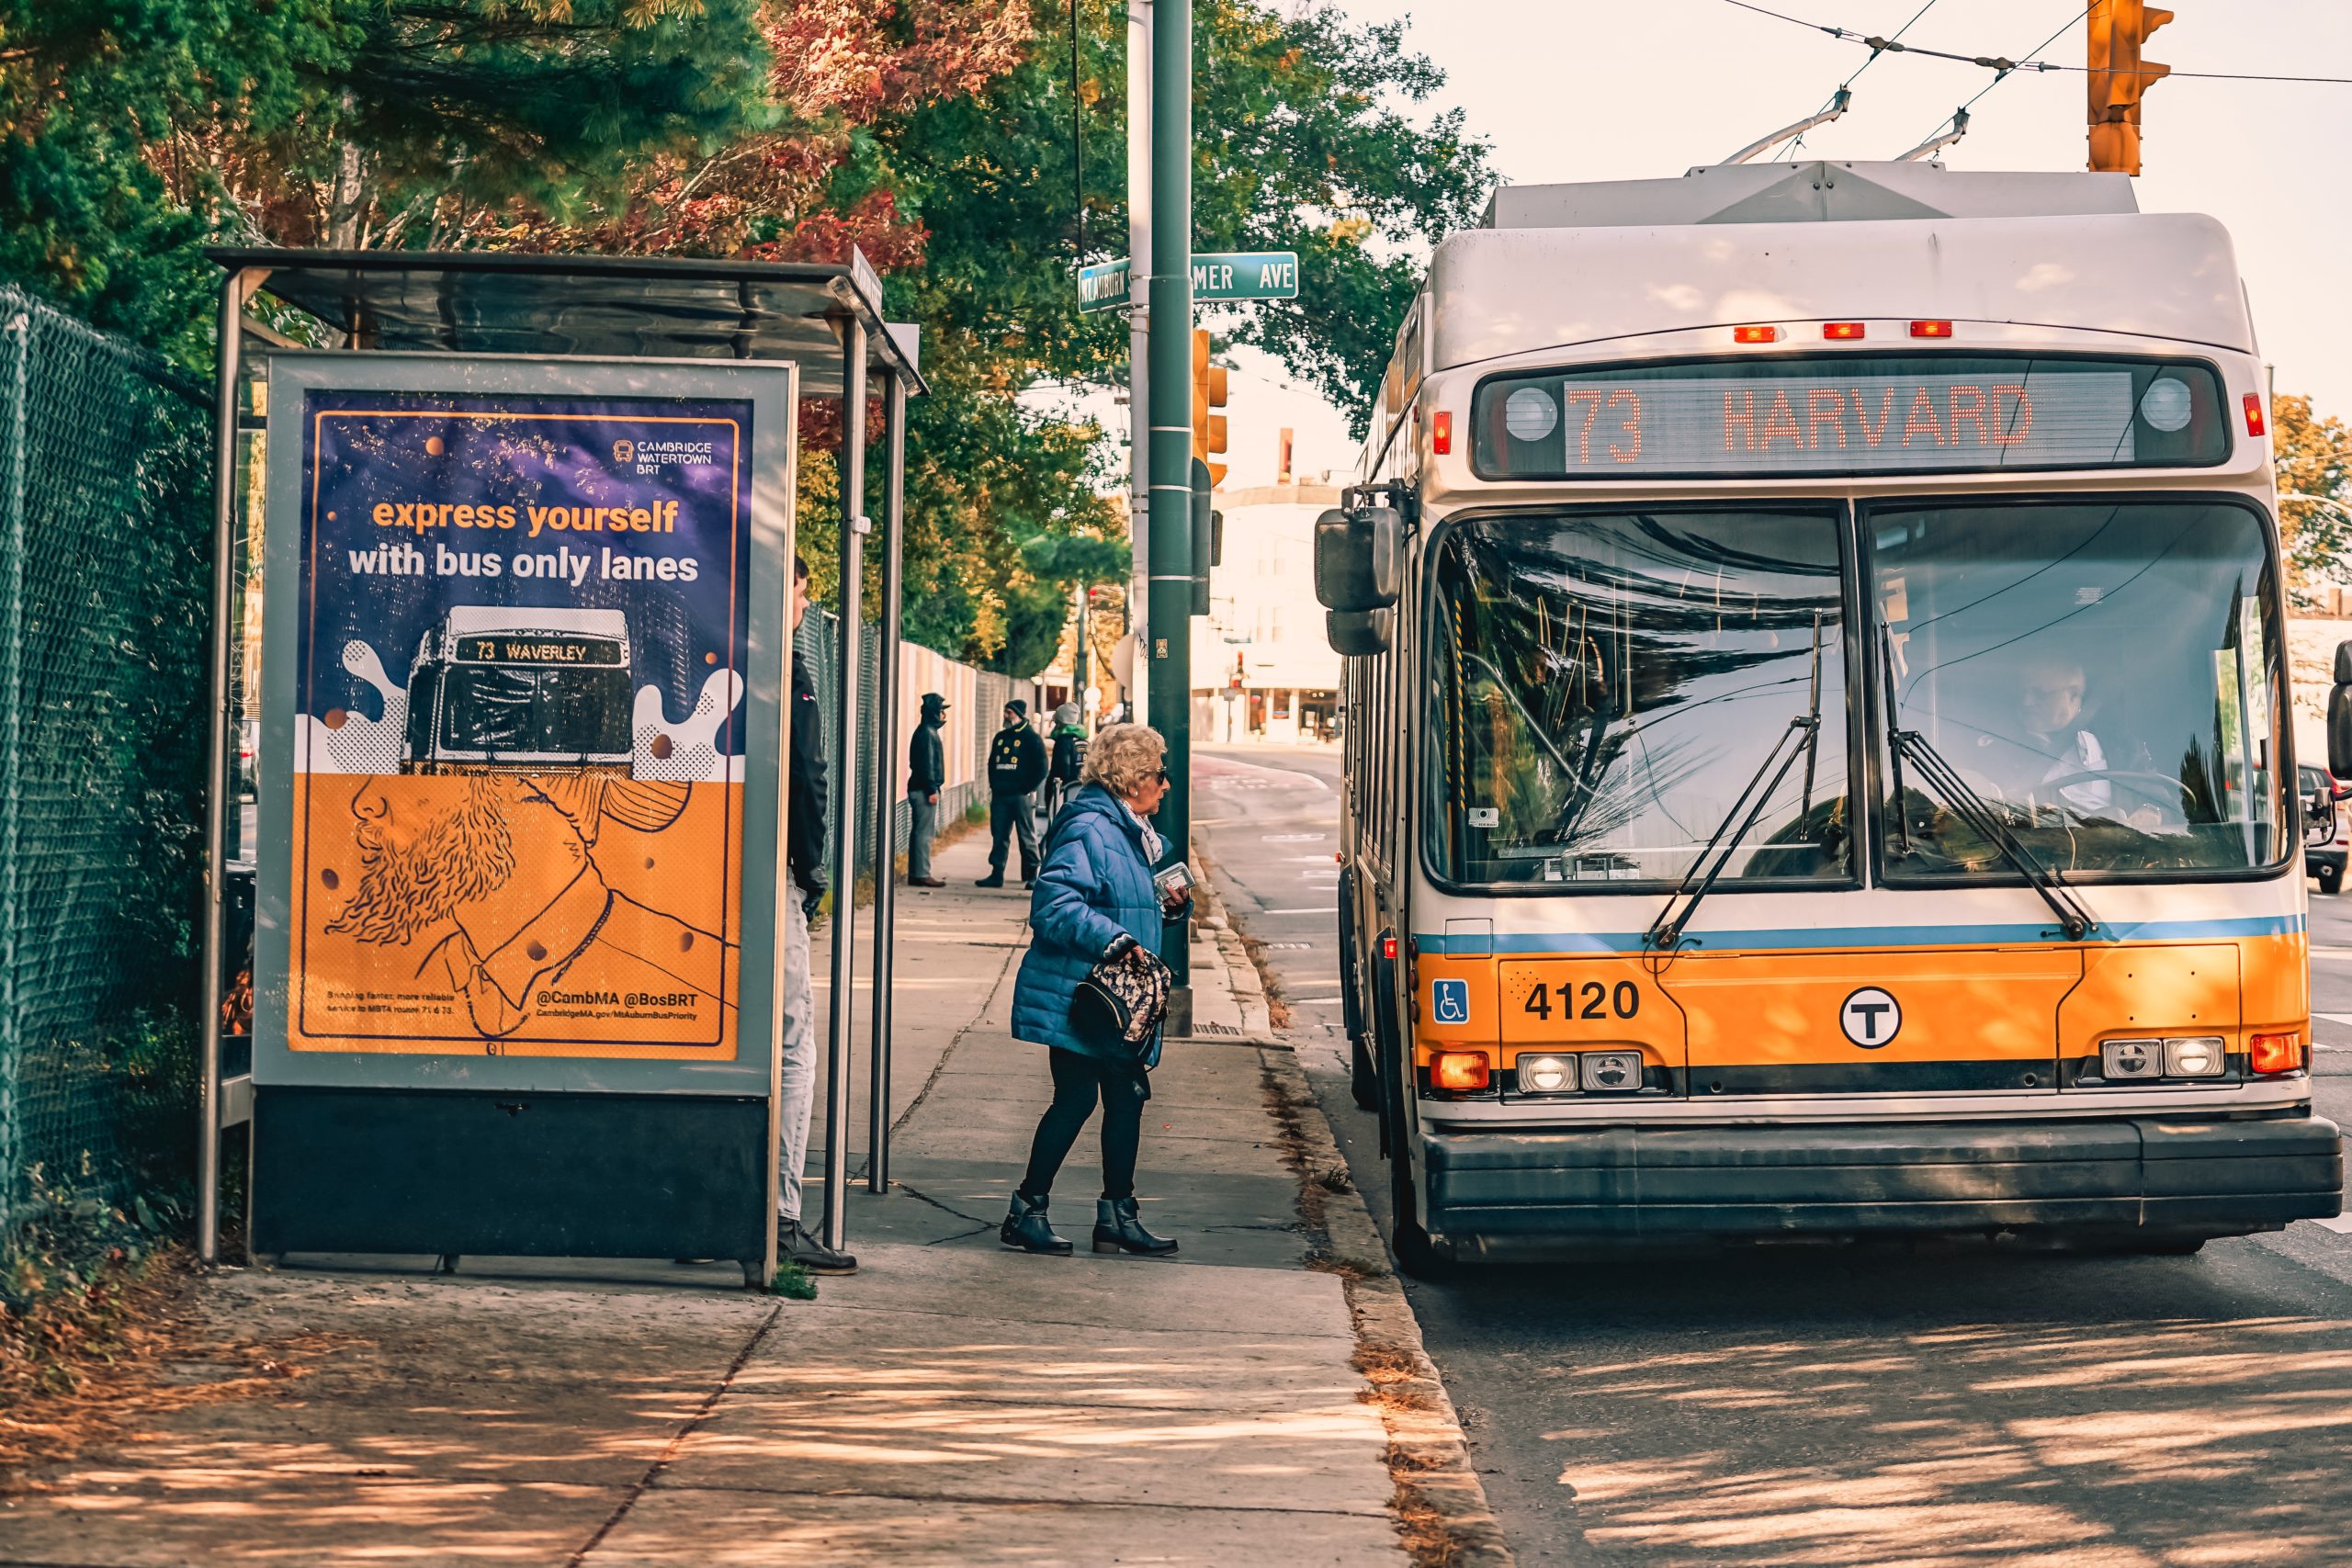 Keeping Pace: Opportunities for Change within Greater Boston’s Bus System